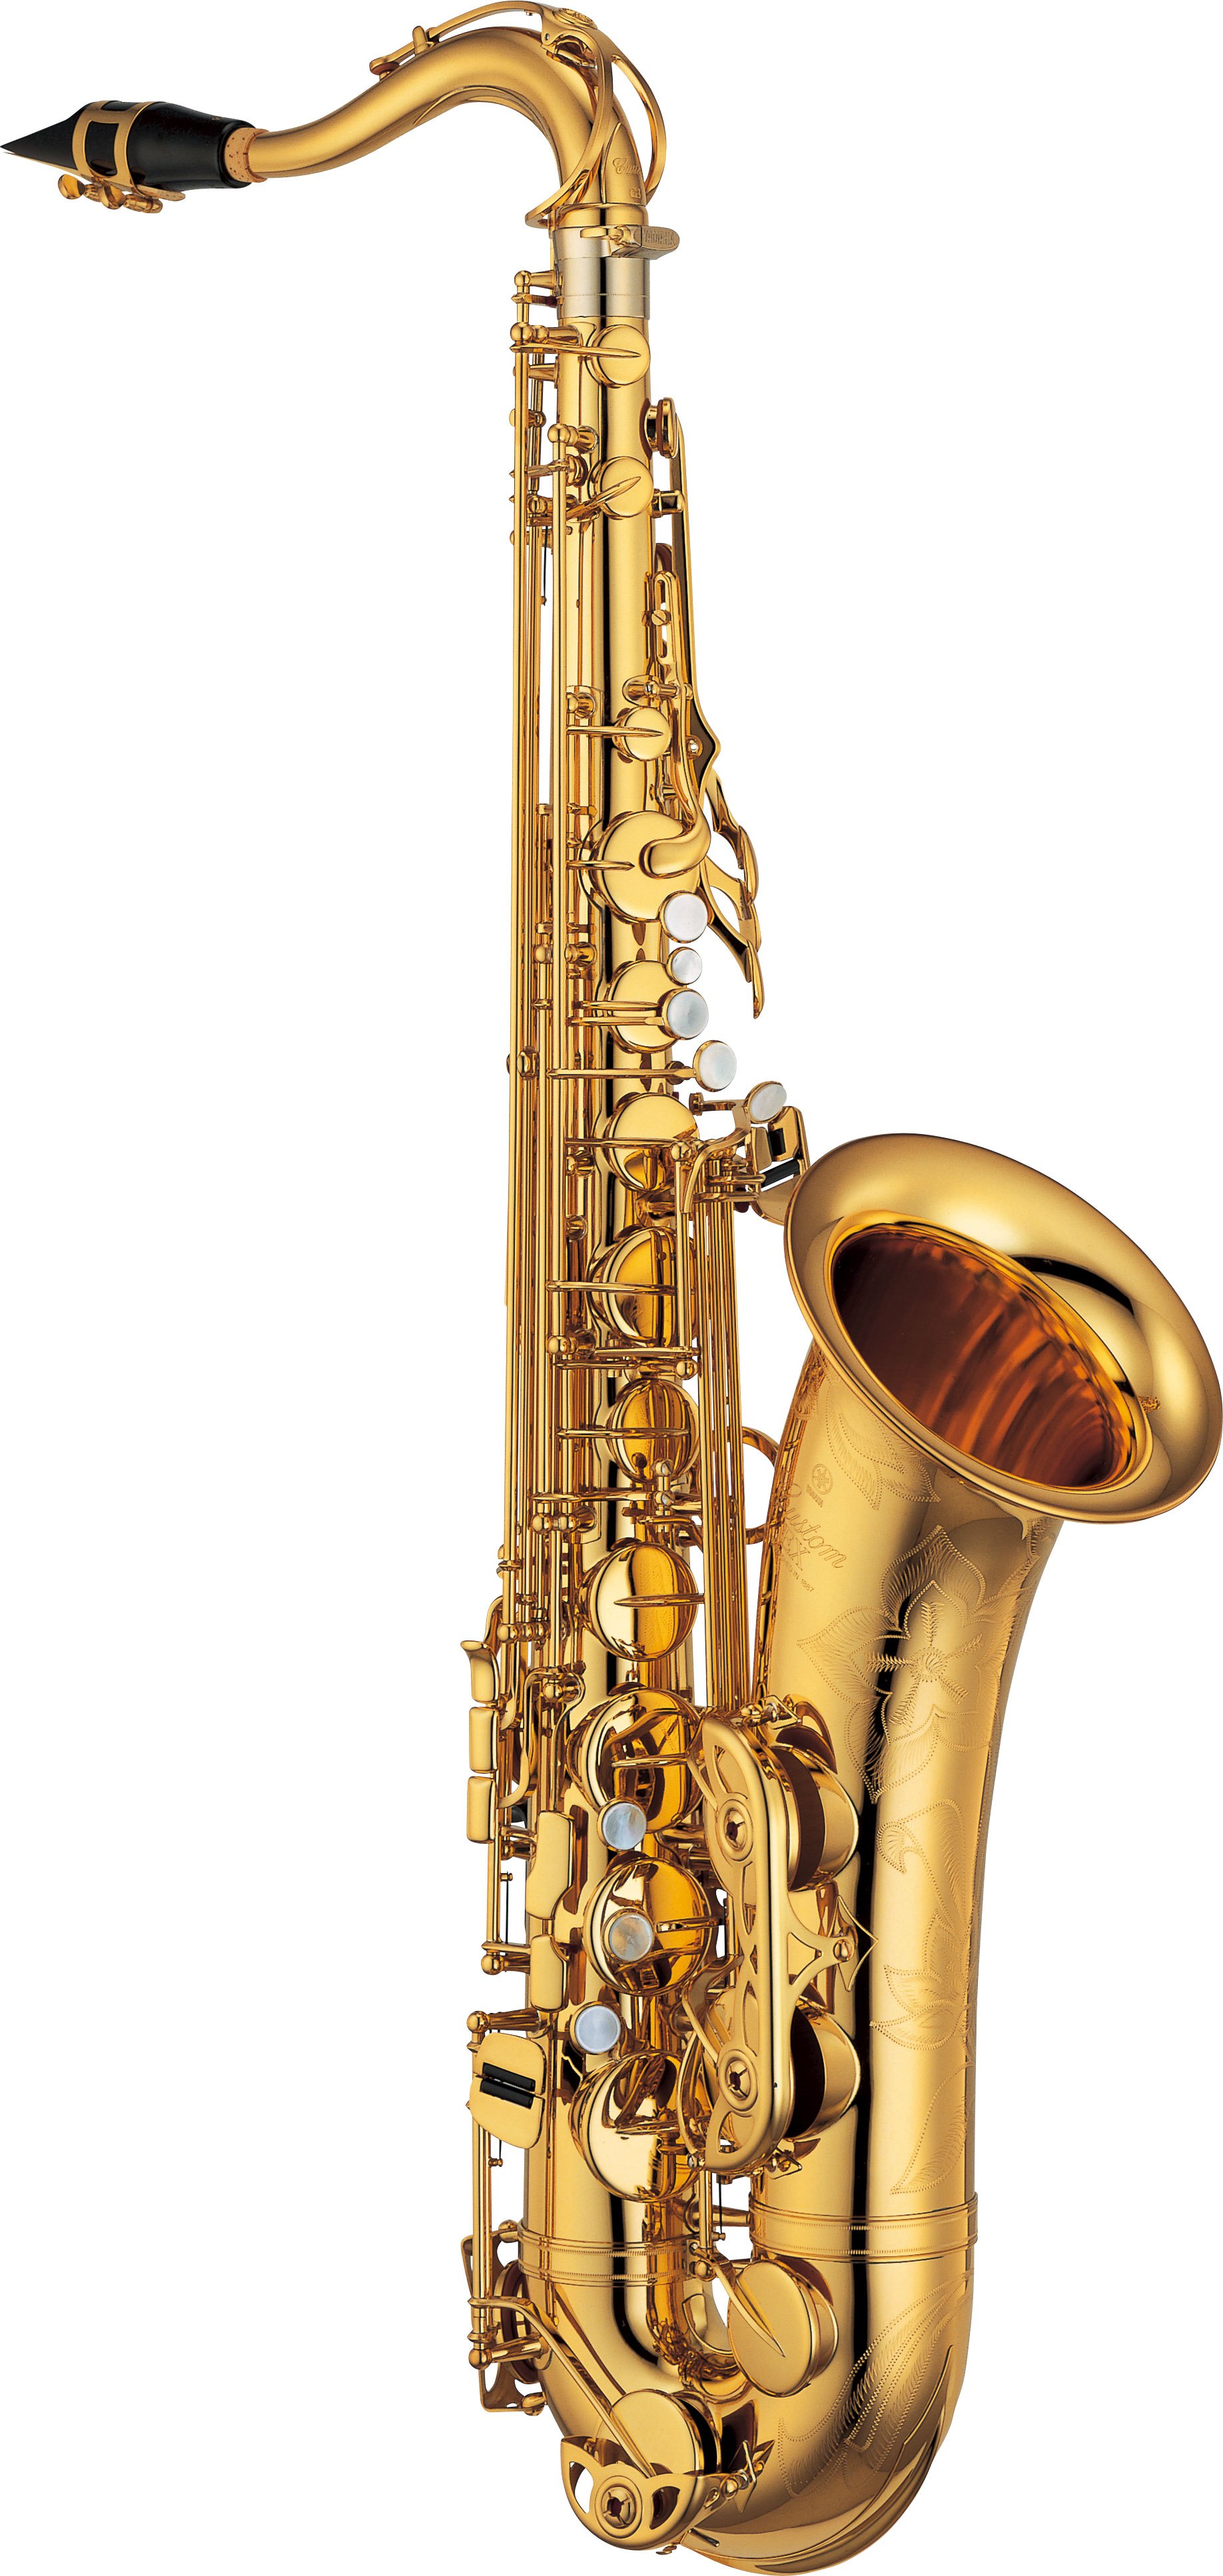 erection Man pawn YTS-875EX - Overview - Saxophones - Brass & Woodwinds - Musical Instruments  - Products - Yamaha - United States